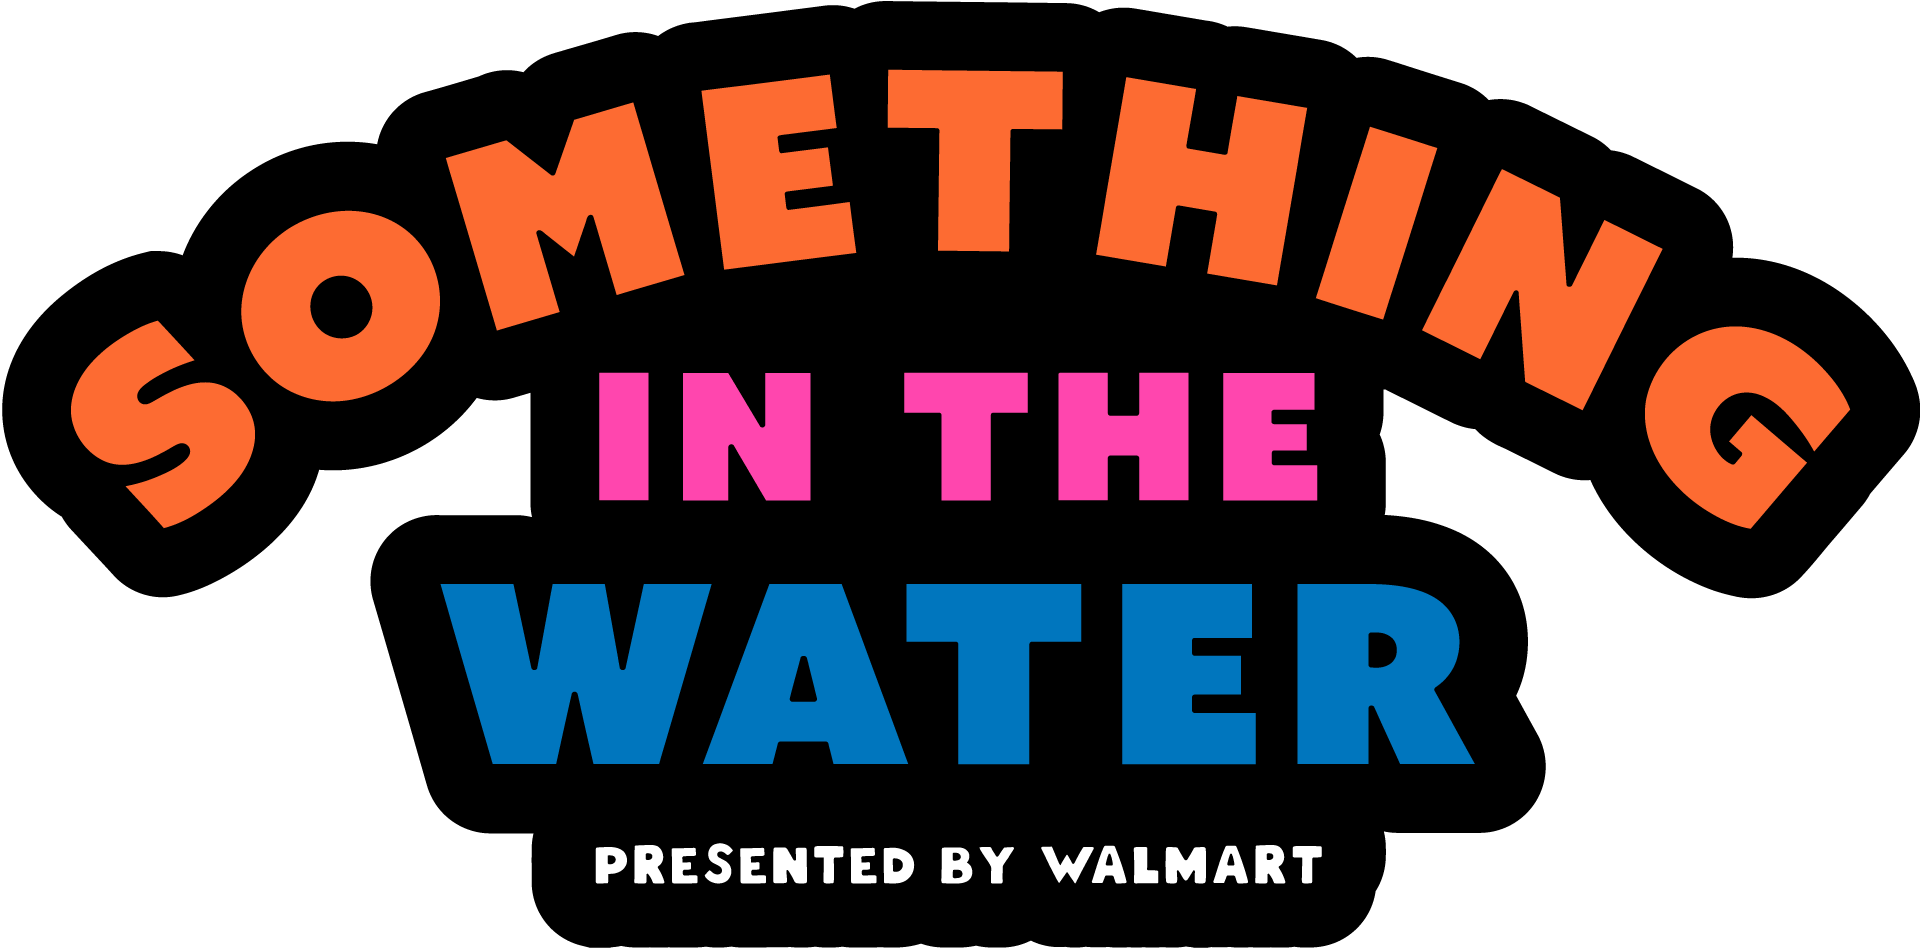 Something in the Water releases performance set times